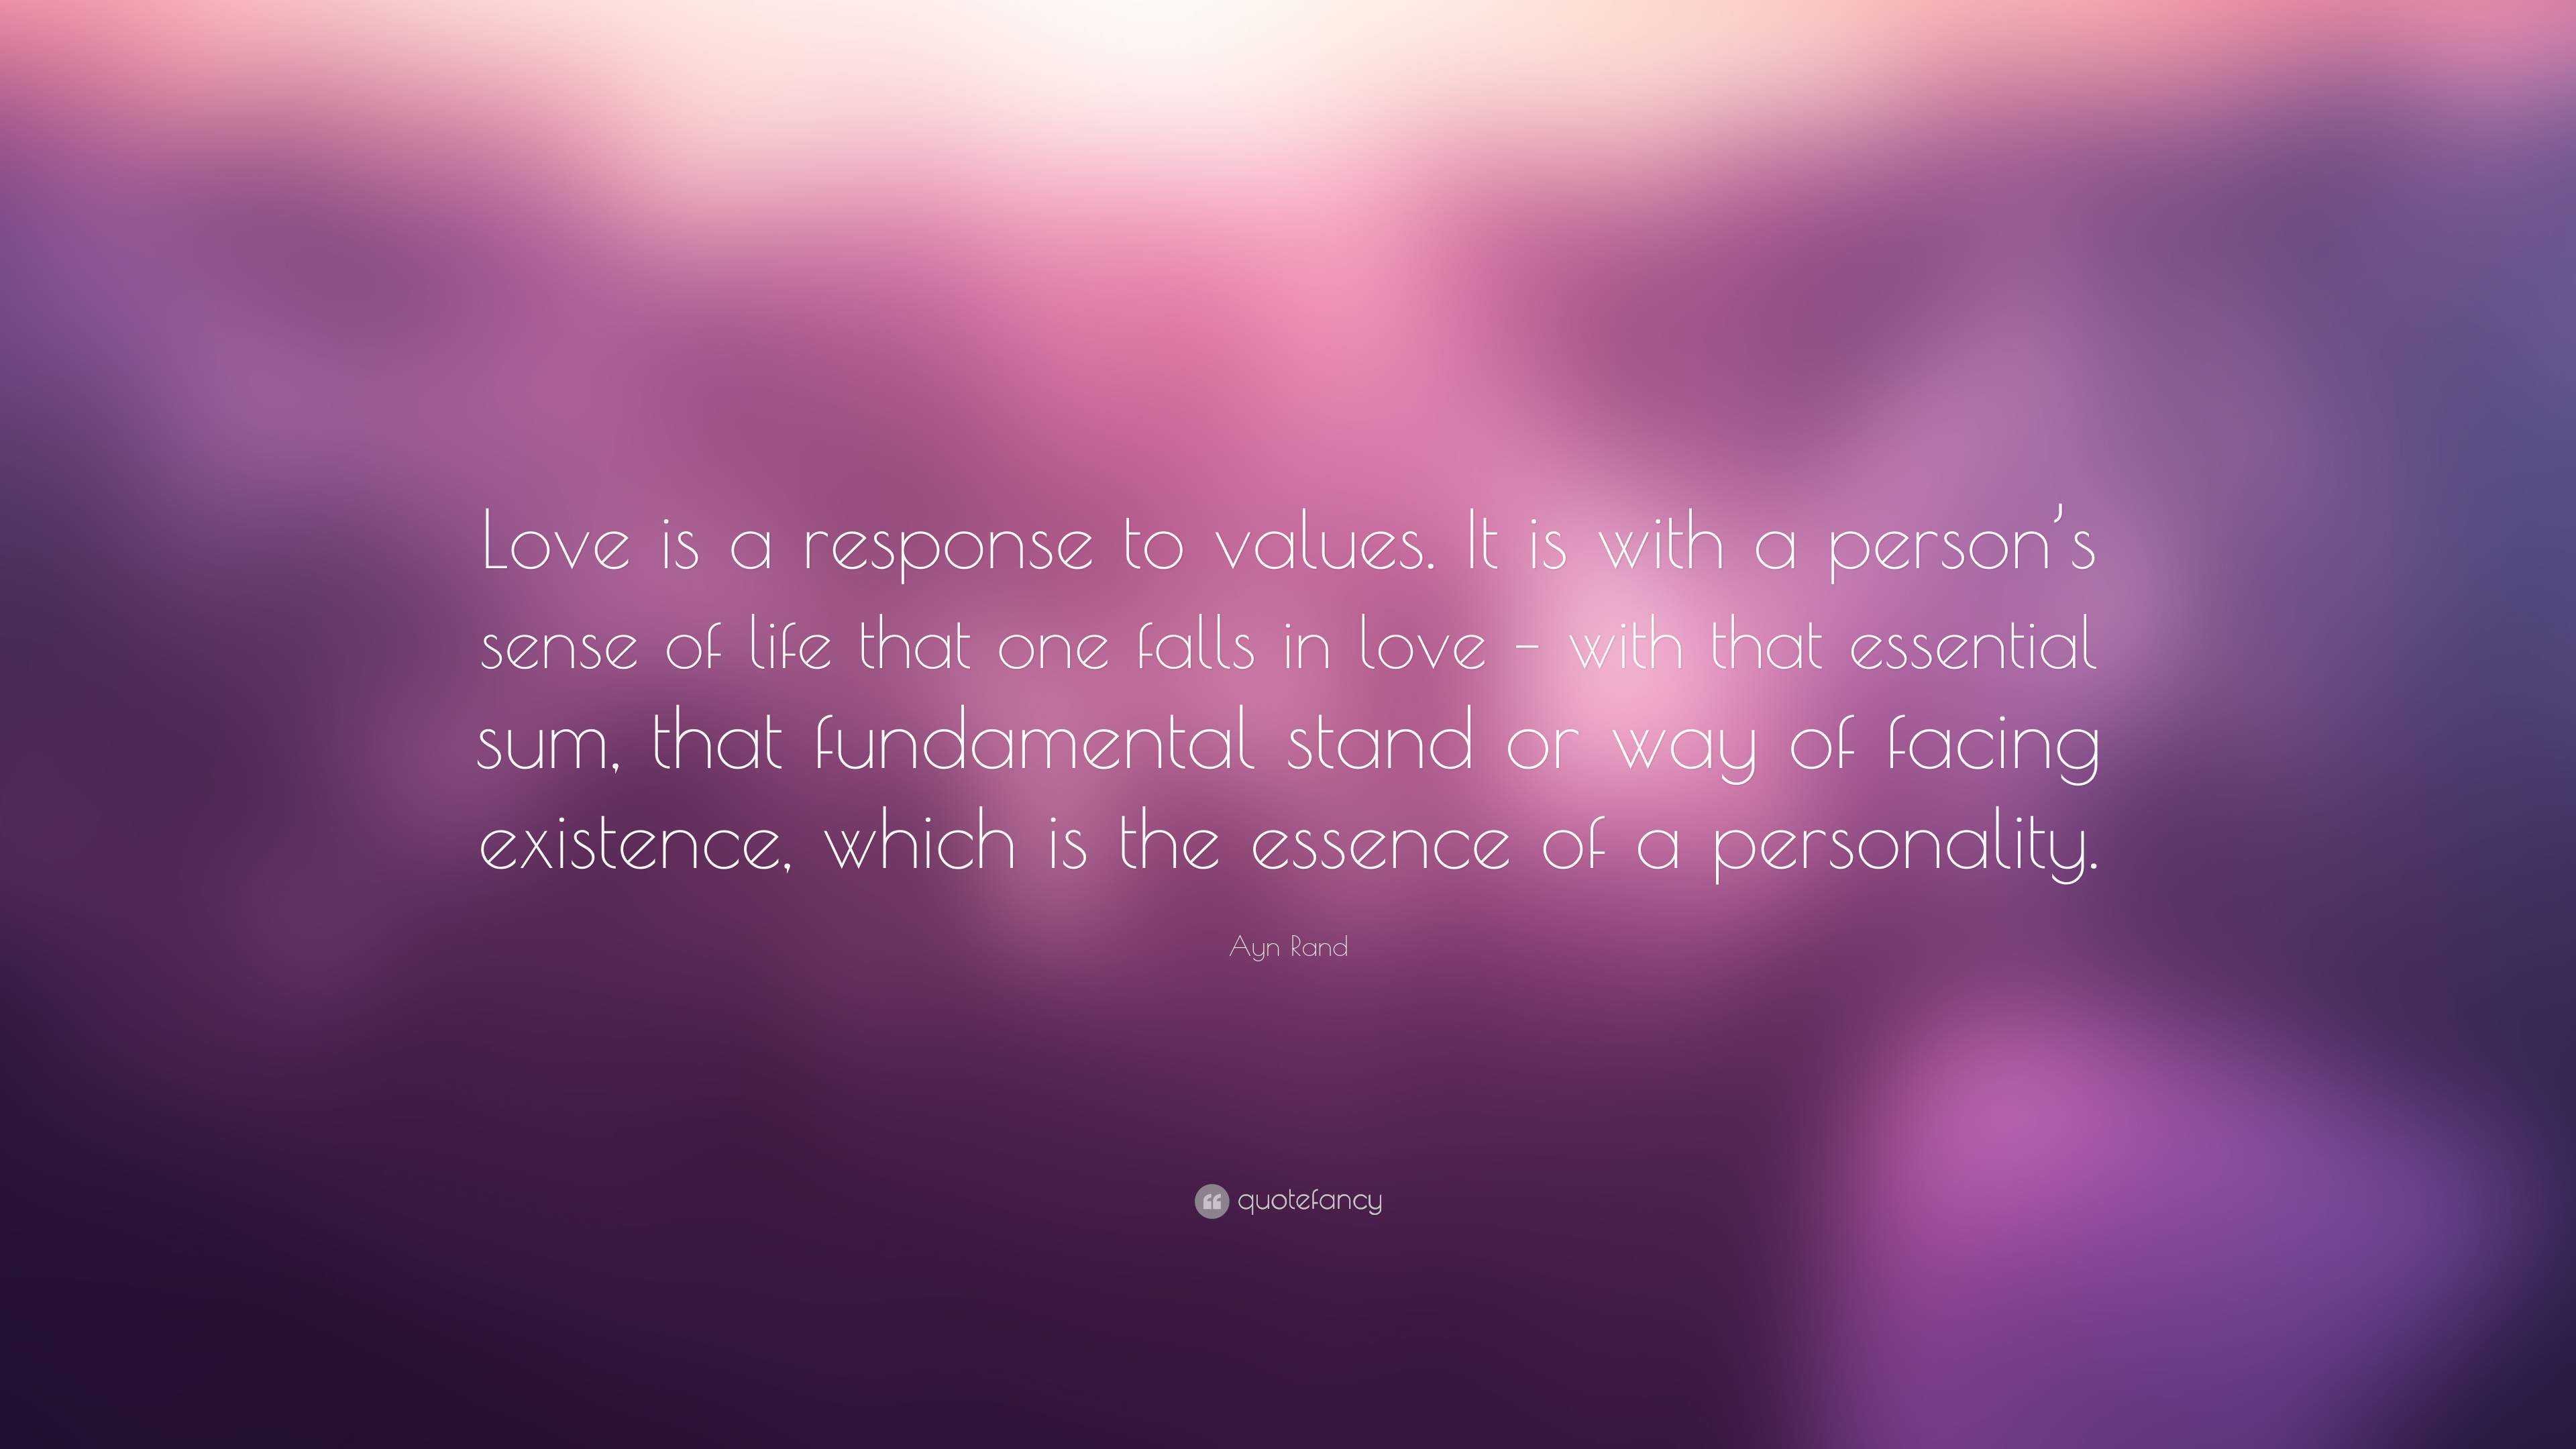 Ayn Rand Quote: “Love is a response to values. It is with a person's sense  of life that one falls in love – with that essential sum